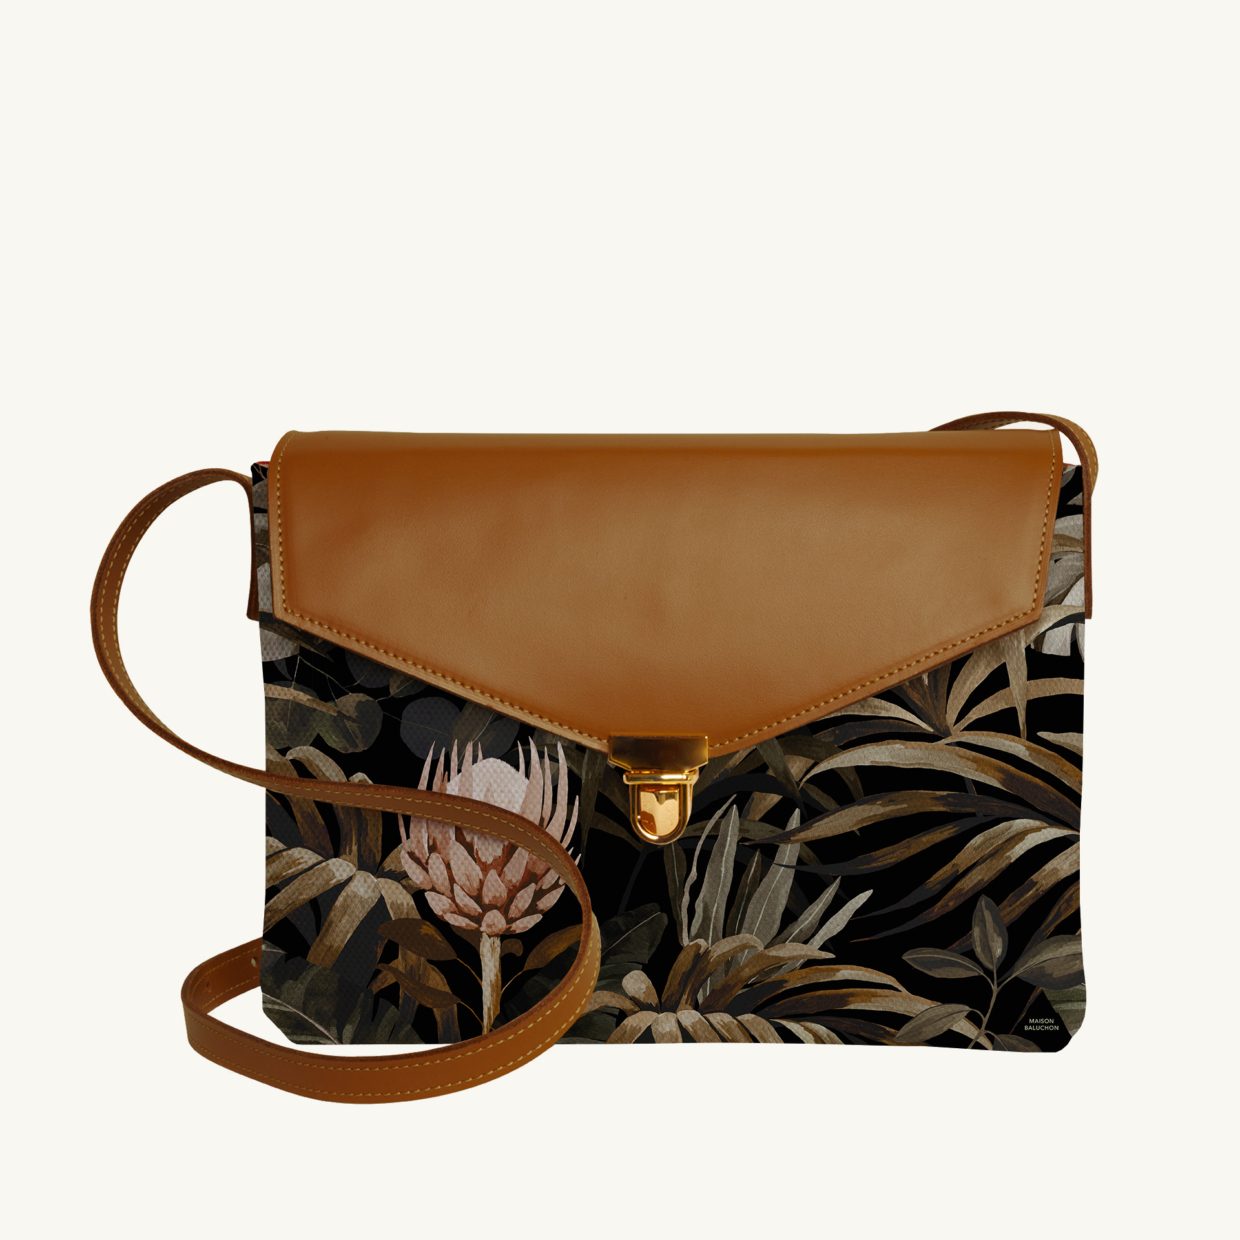 Purse Tropical N°15 - Camel leather